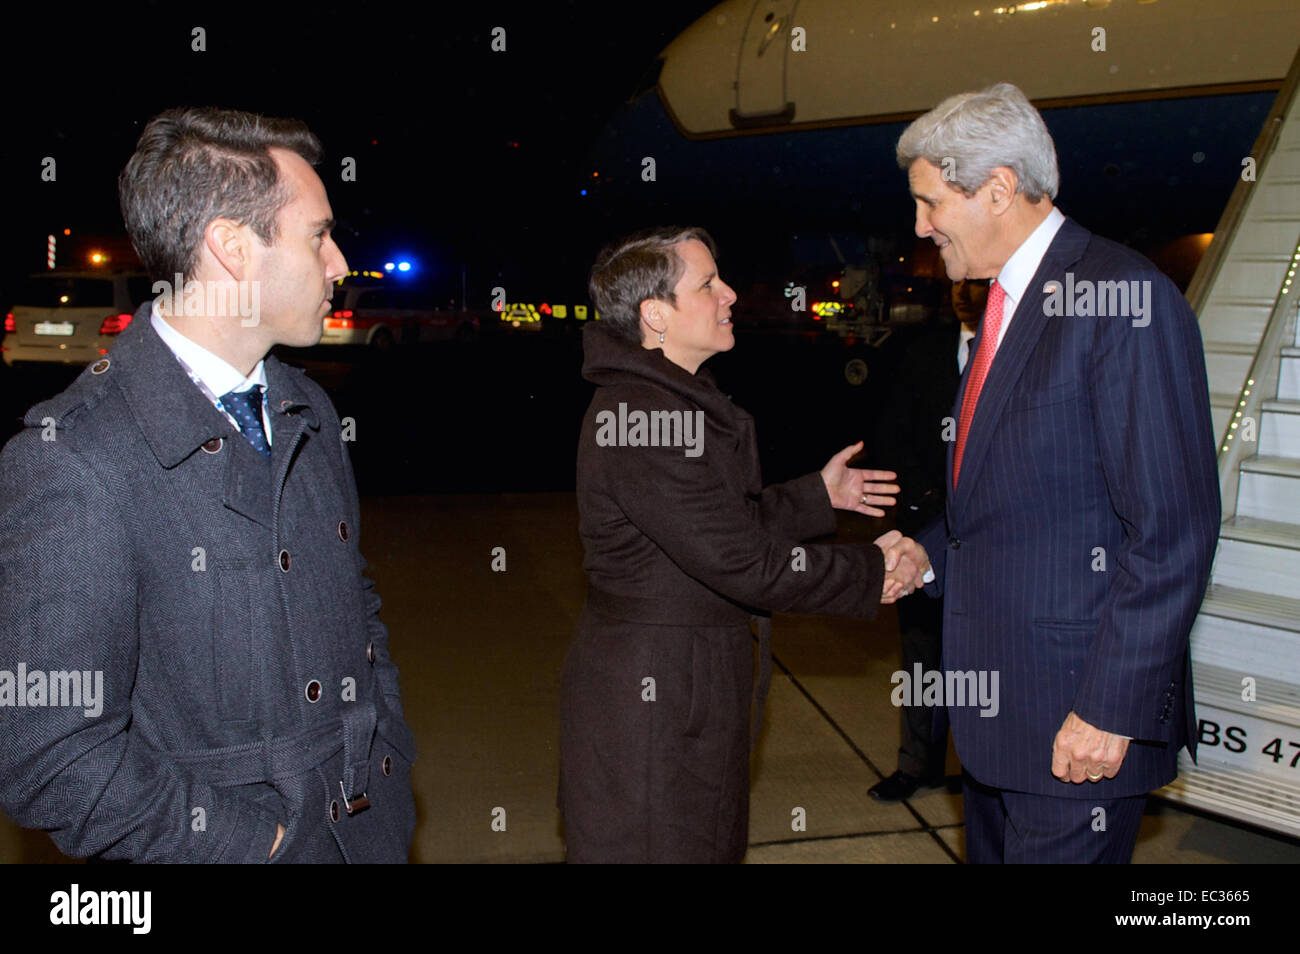 U.S. Ambassador to Switzerland Suzan &quot;Suzi&quot; LeVine, joined by U.S. Ambassador to the Organization for Security and Cooperation in Europe Daniel Baer, greets U.S. Secretary of State John Kerry as he arrives in Basel, Switzerland, on December 3, 2014, for a series of OSCE meetings. Stock Photo